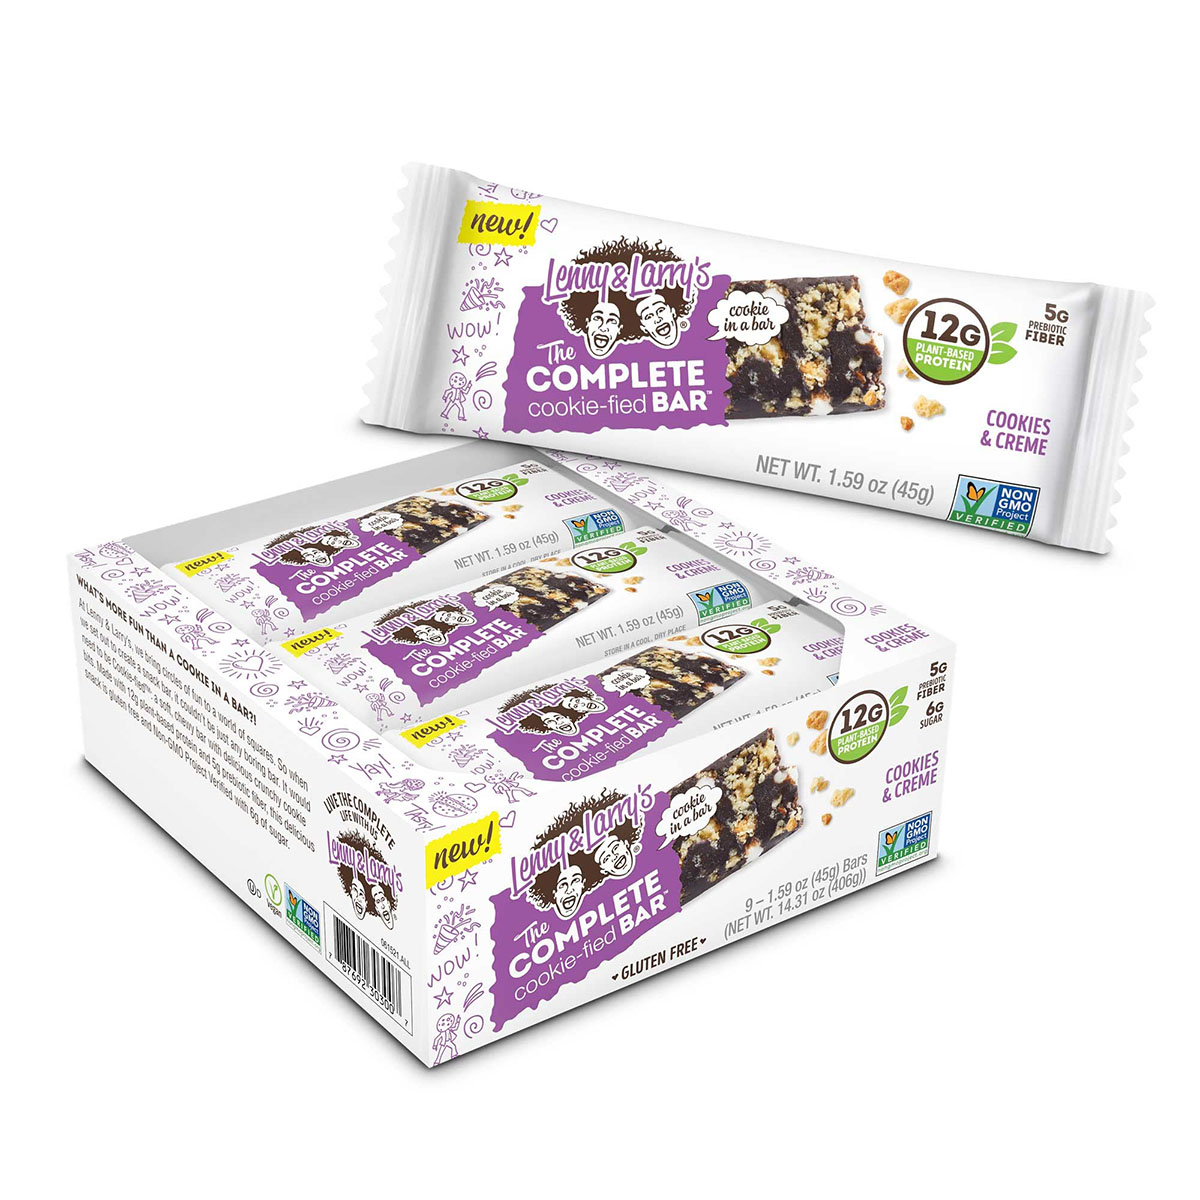 Lenny & Larry’s The Complete Cookie-fied Bar, Box of 9 Bars, Cookies and Cream